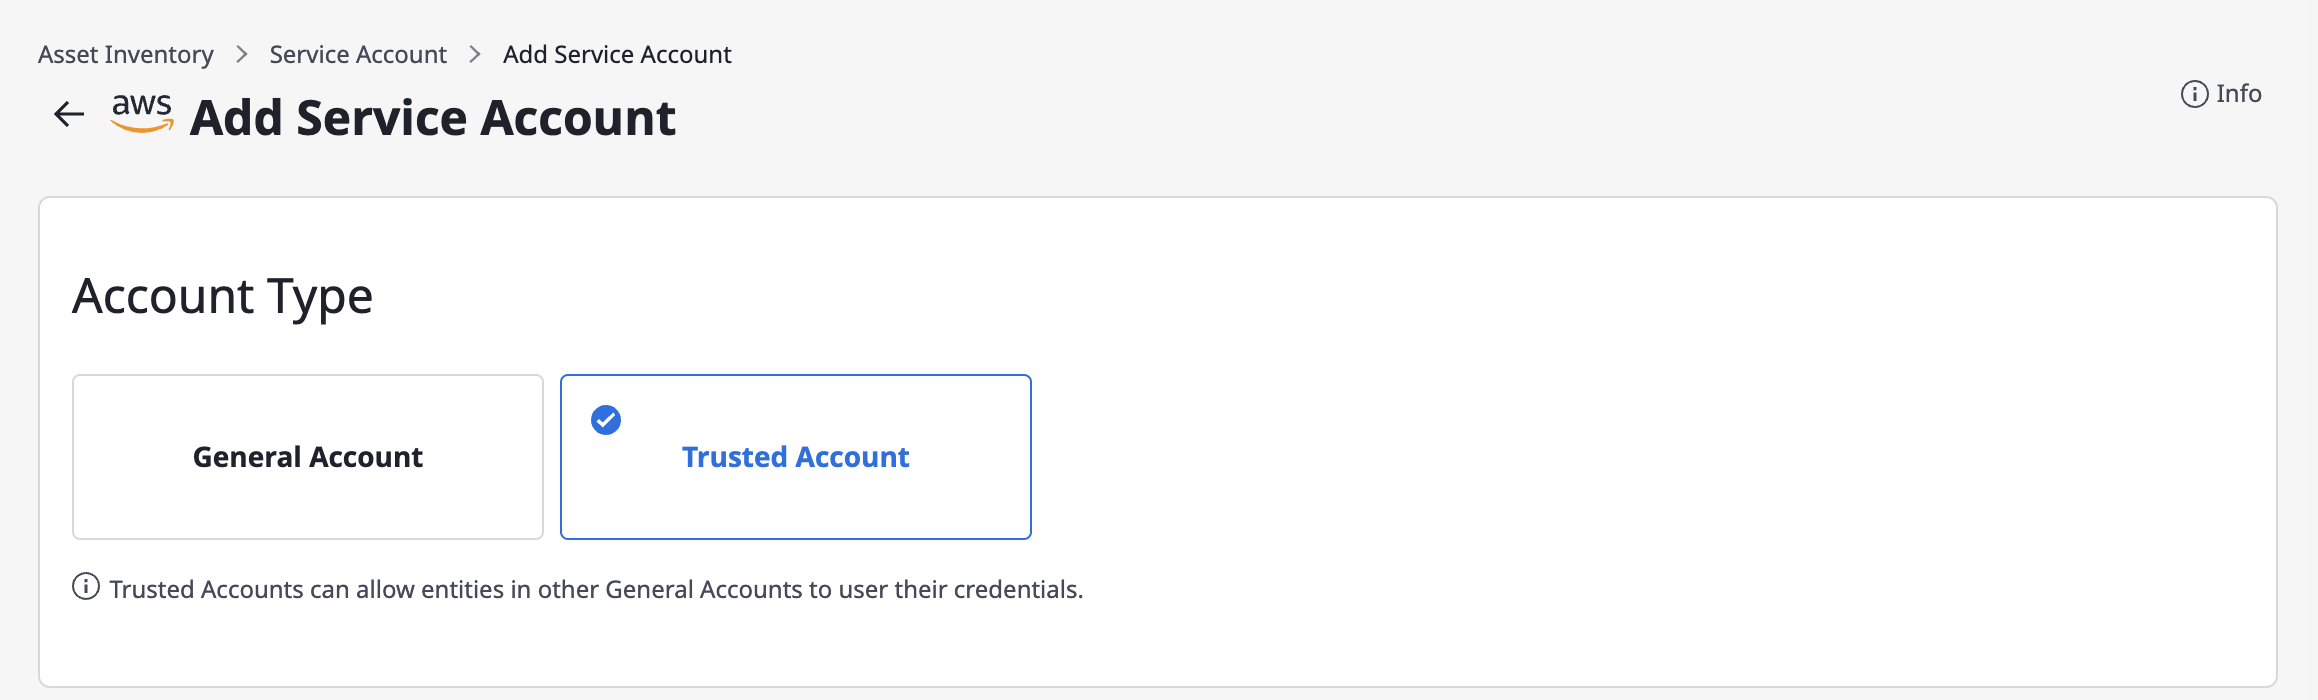 service-account-select-trusted-accout